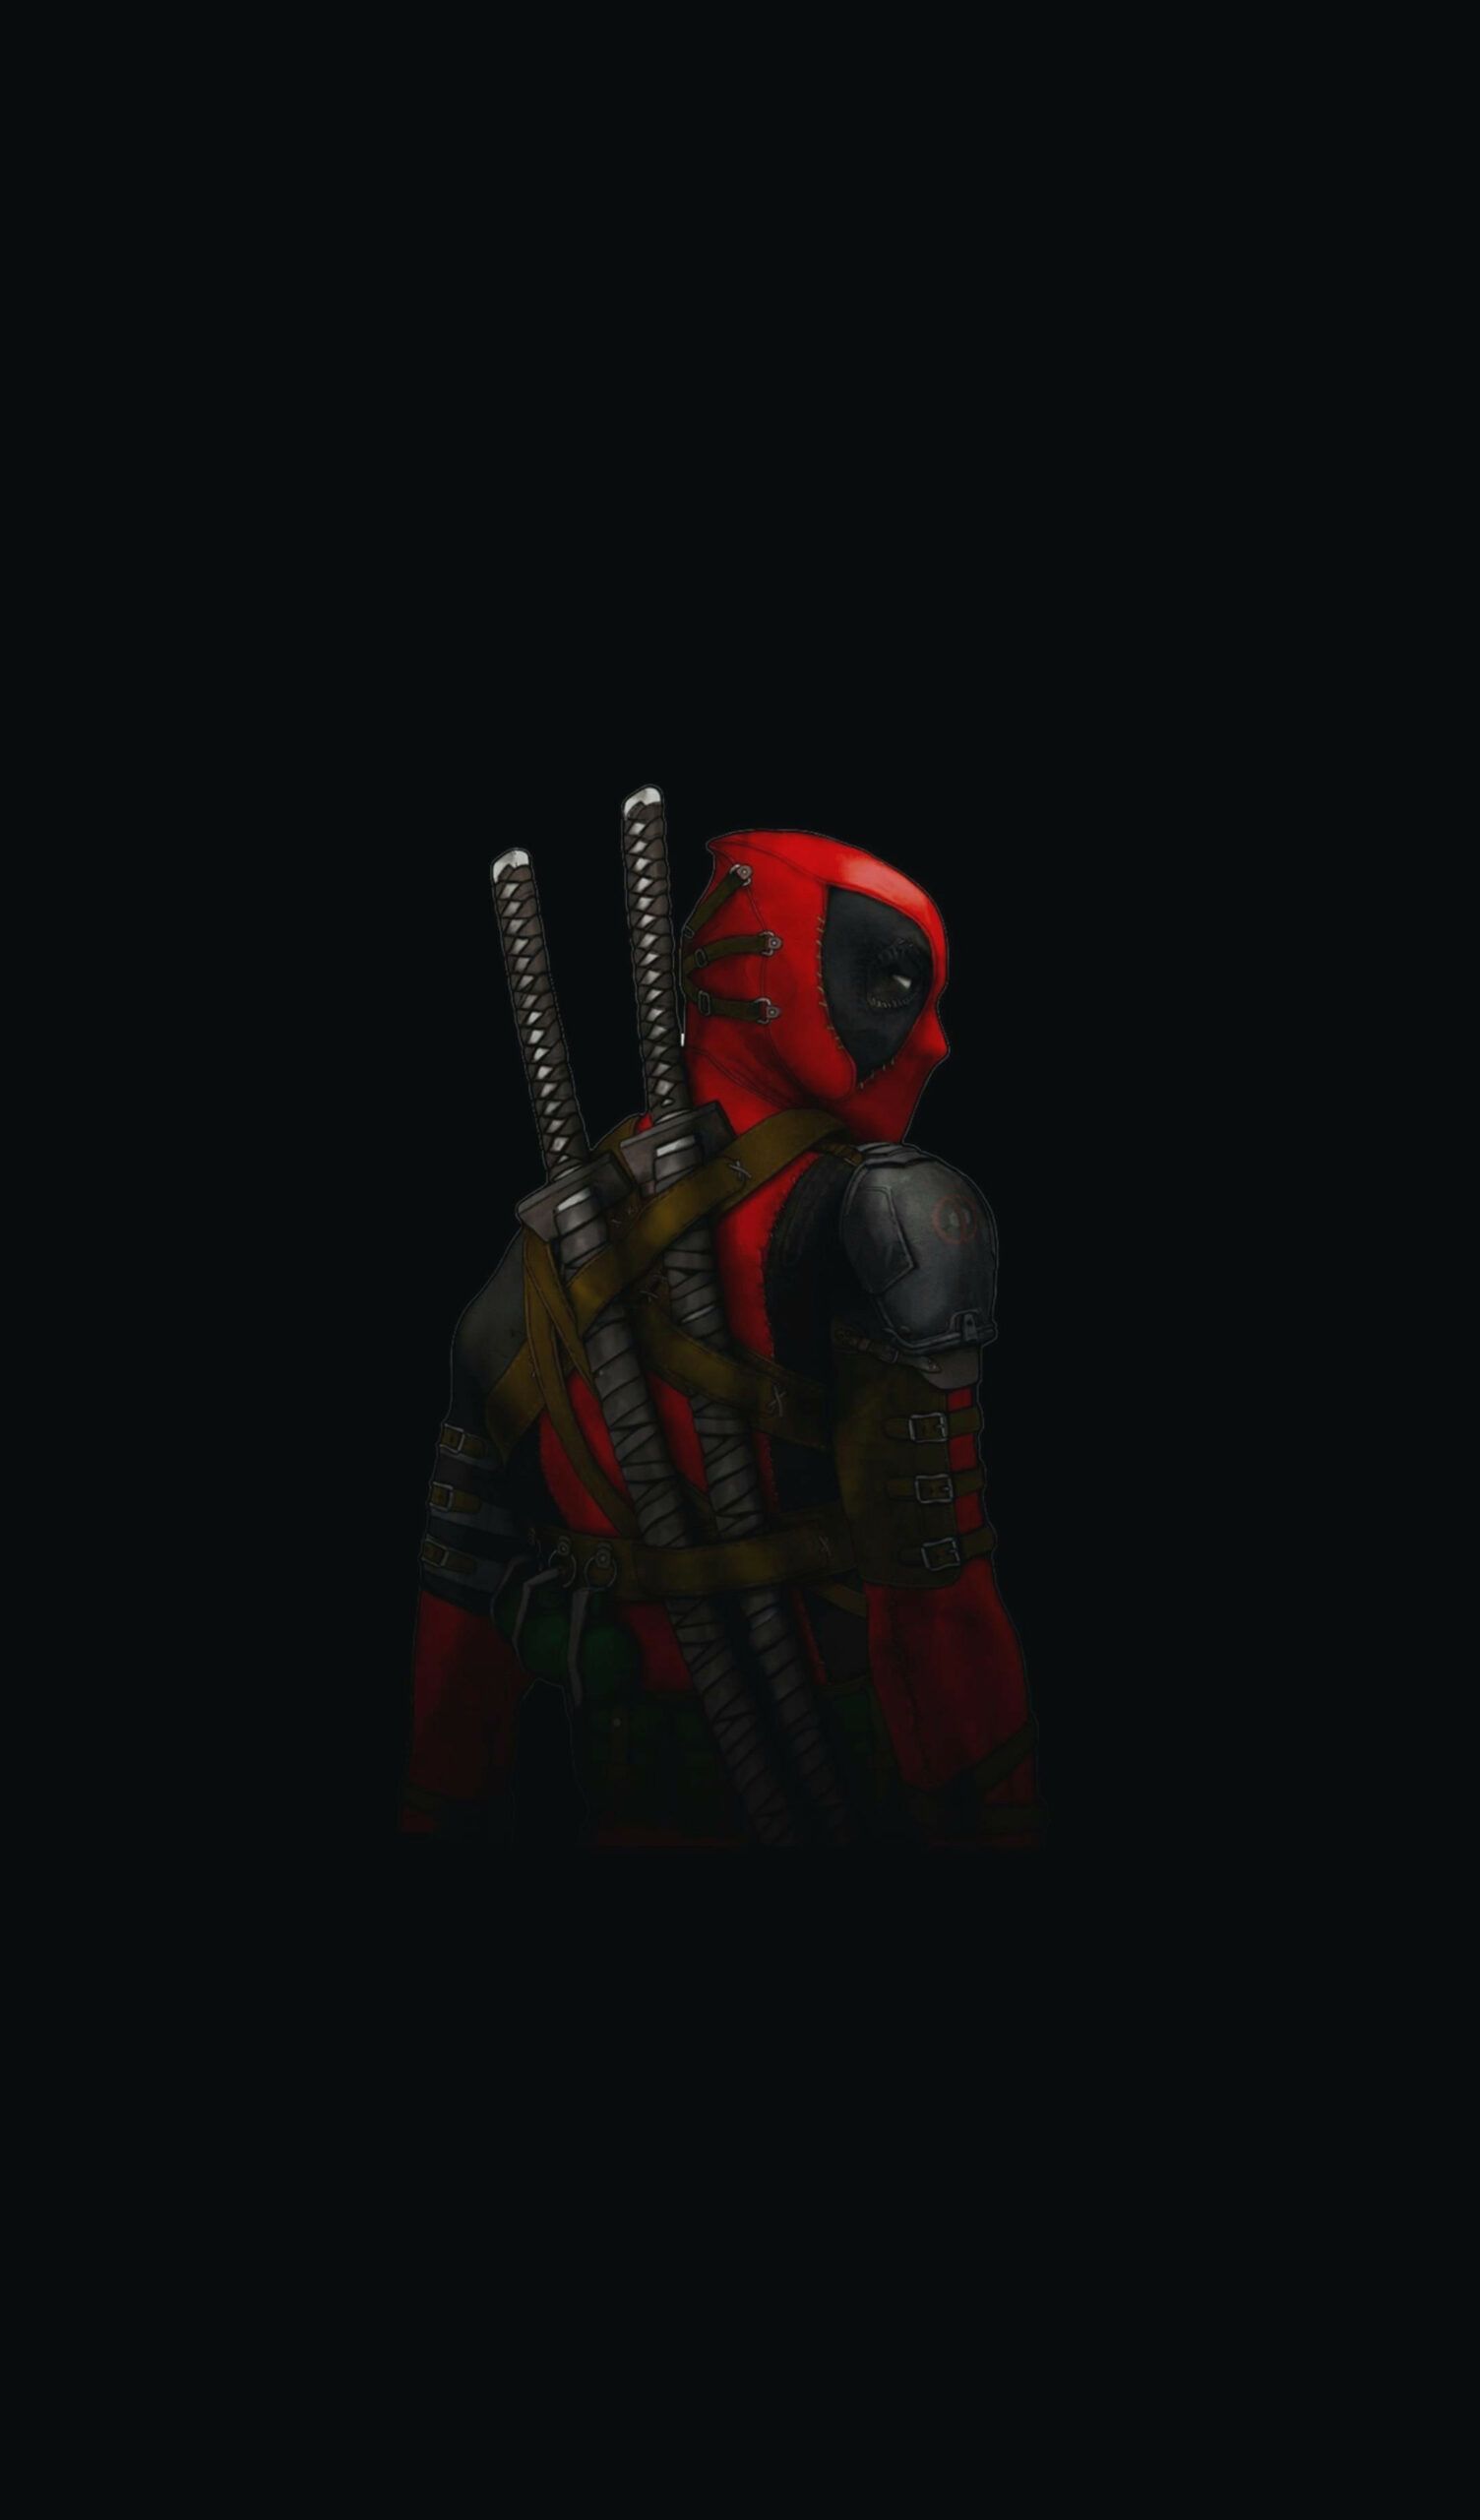 Awesome Deadpool Wallpaper Darkness Free Wallpaper And Background. Deadpool wallpaper iphone, Deadpool wallpaper, Deadpool art